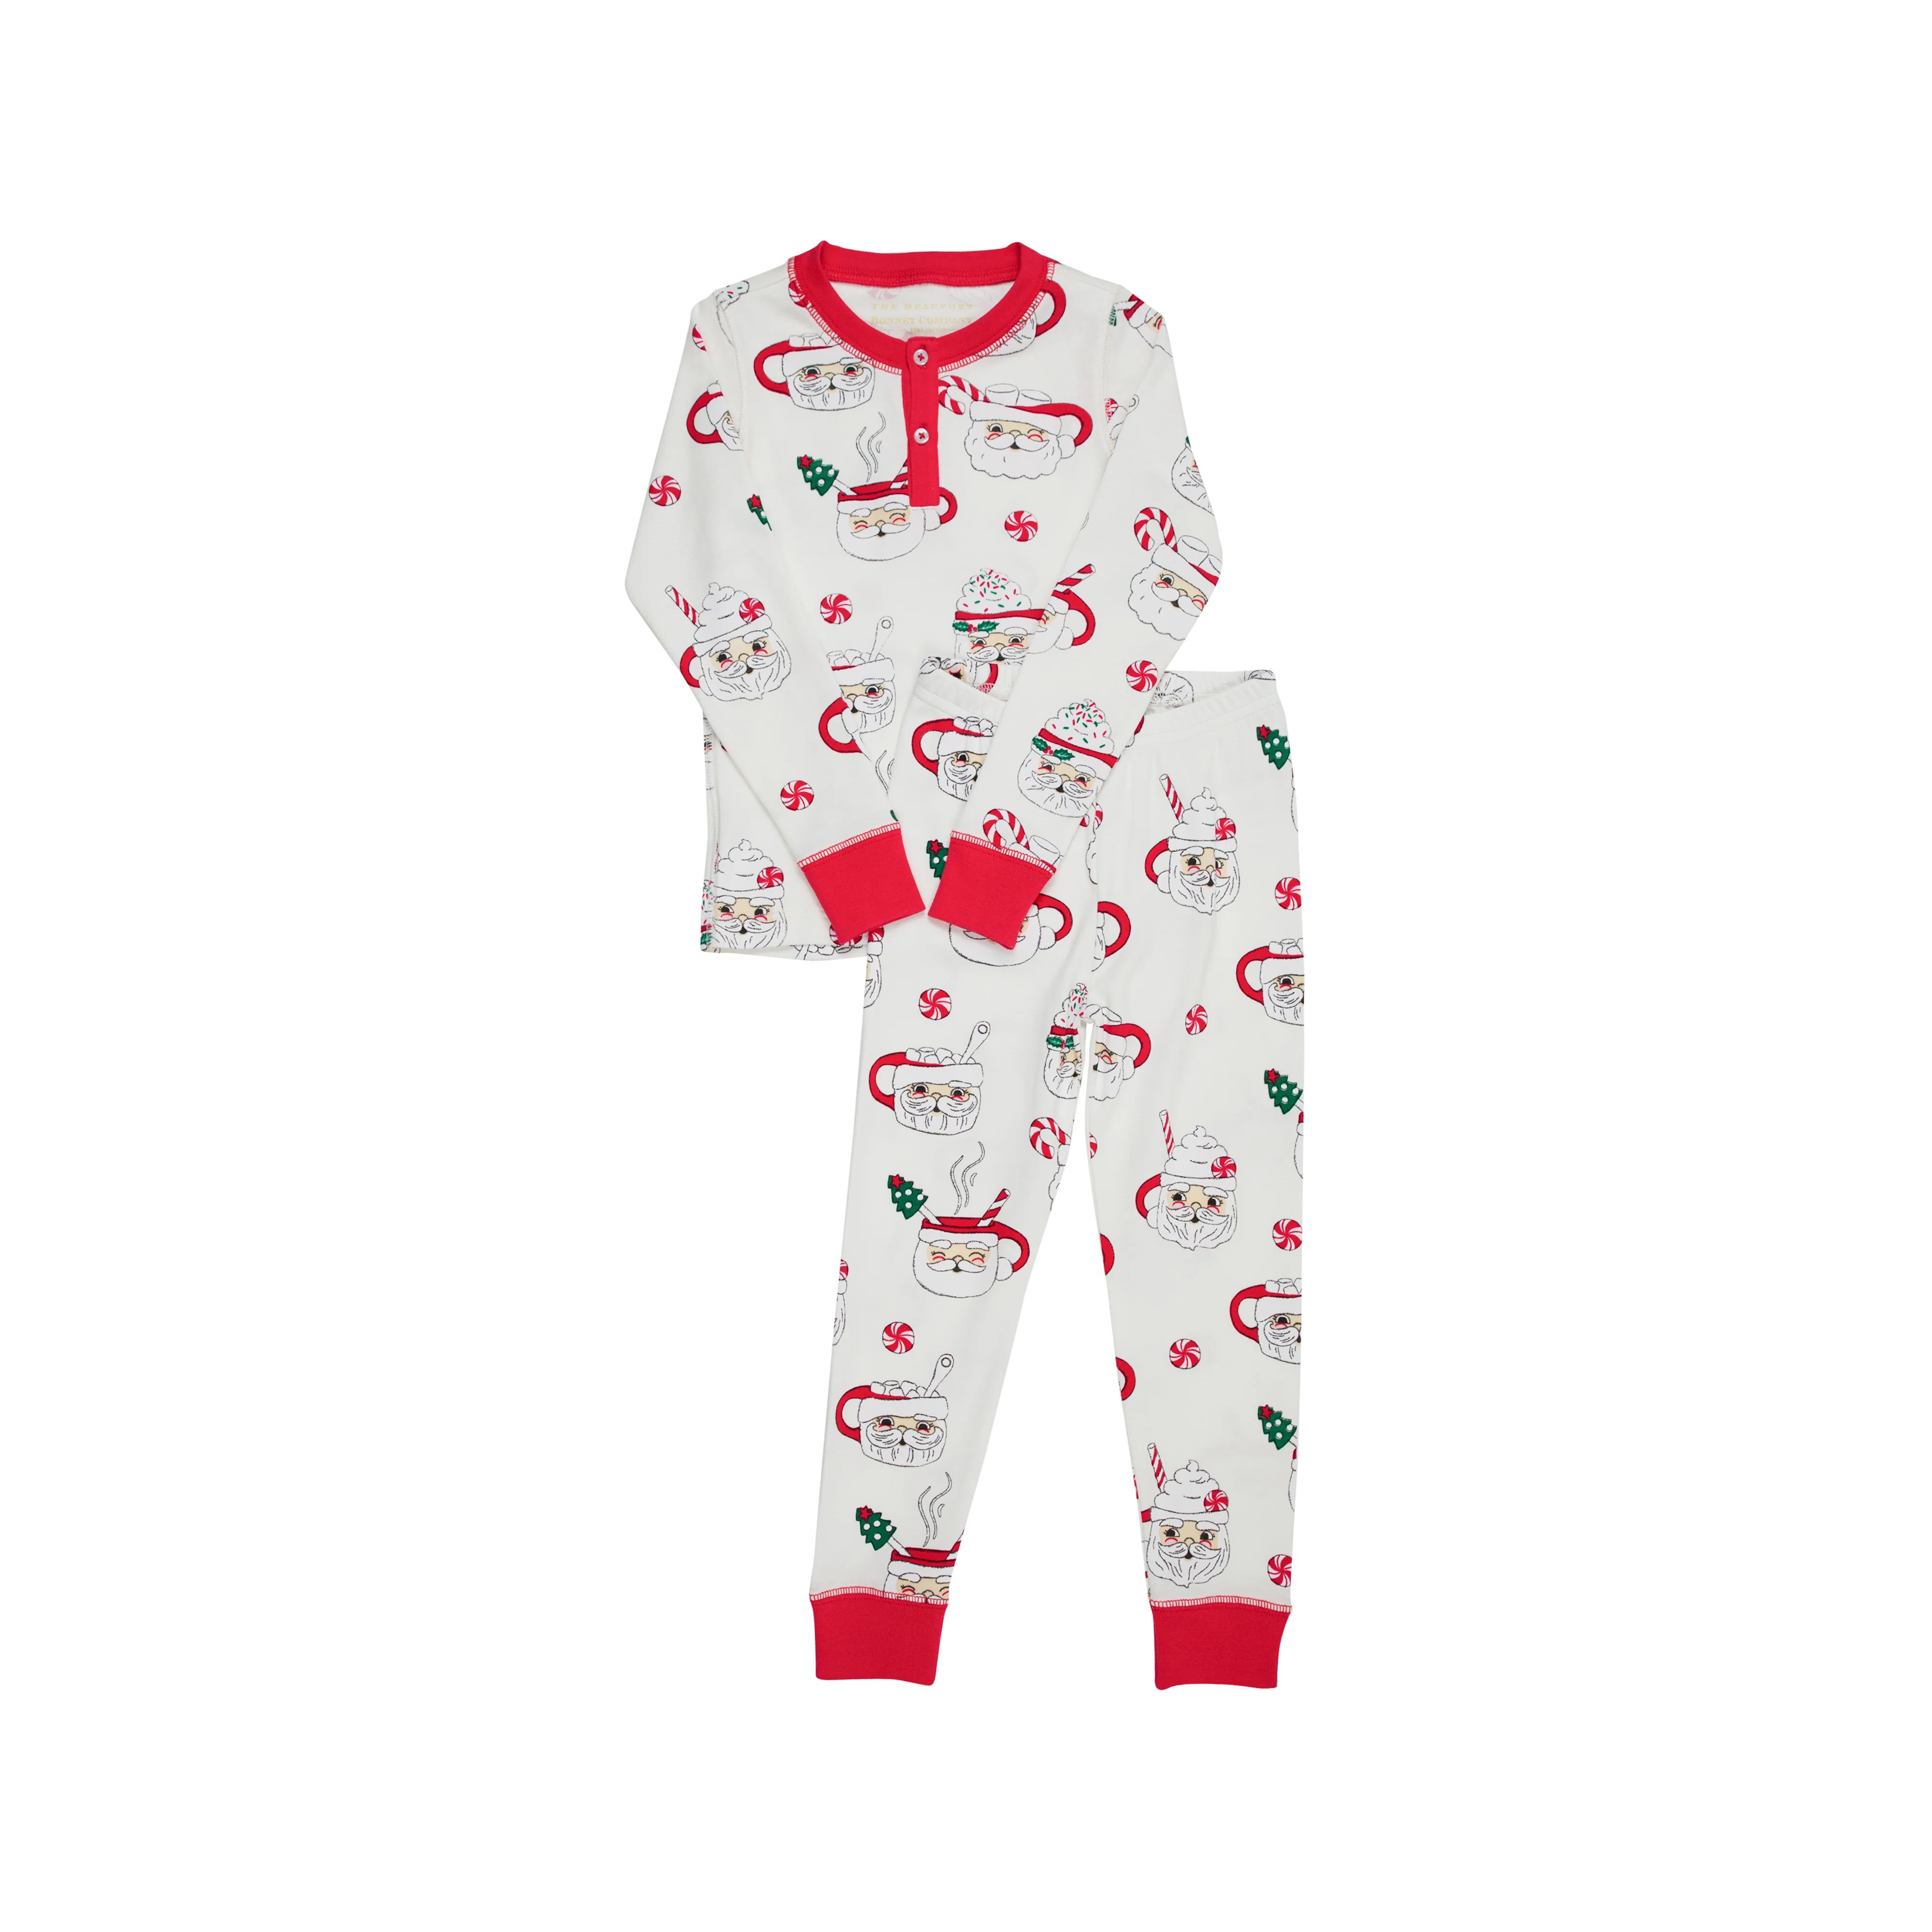 Sutton's Sweet Dream Set (Unisex) - Keeping Spirits Bright with Richmond Red | The Beaufort Bonnet Company